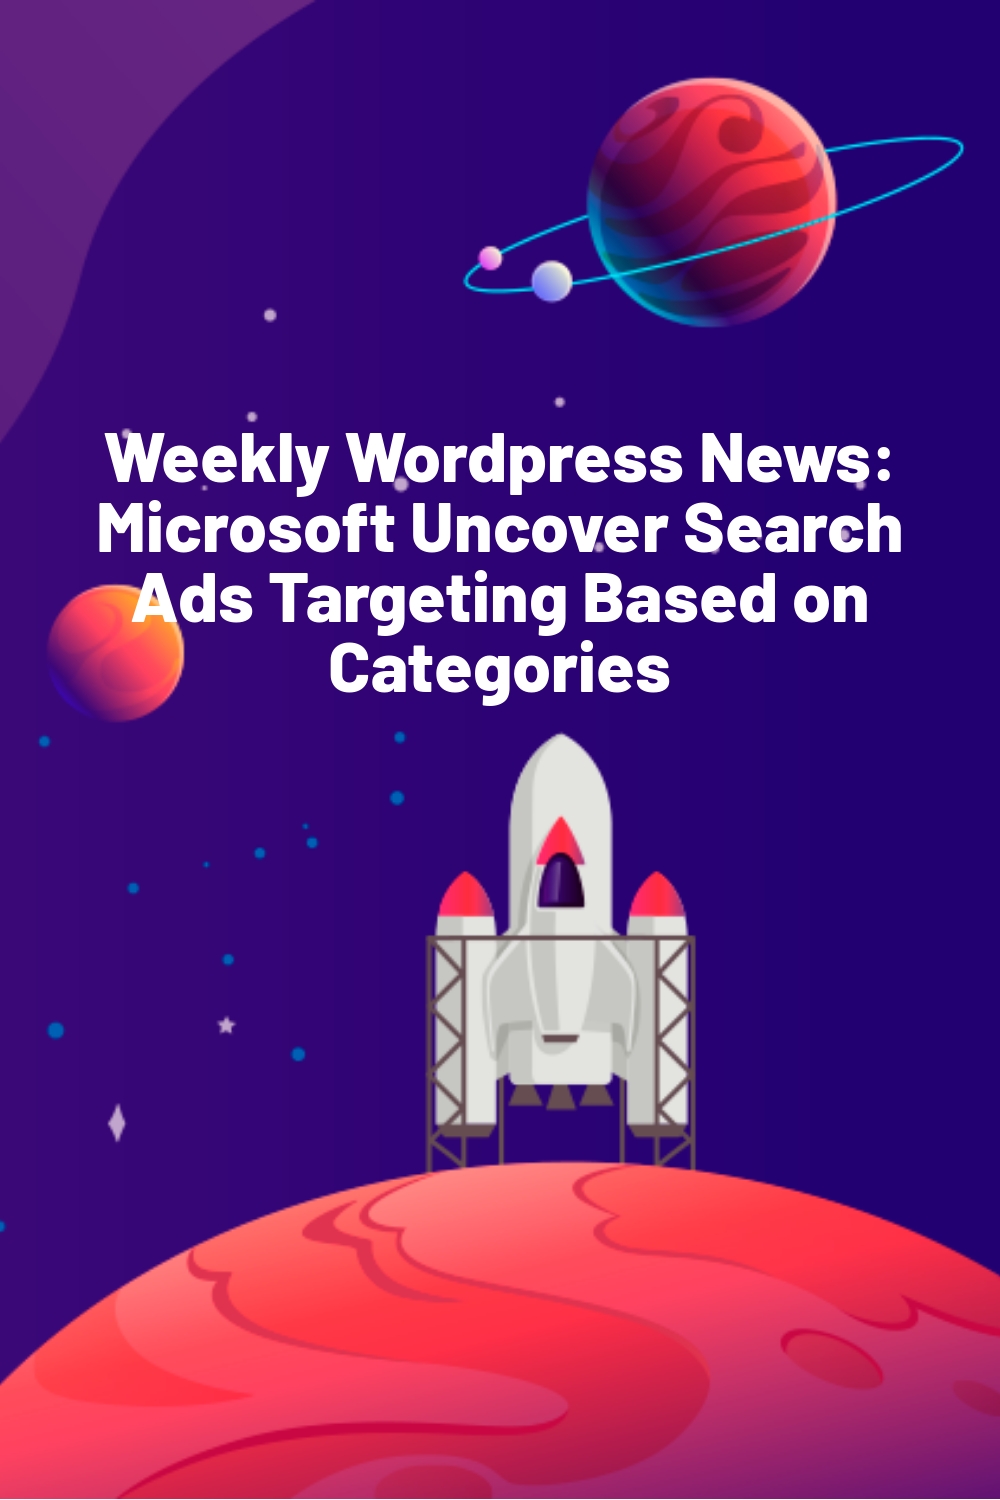 Weekly WordPress News: Microsoft Uncover Search Ads Targeting Based on Categories